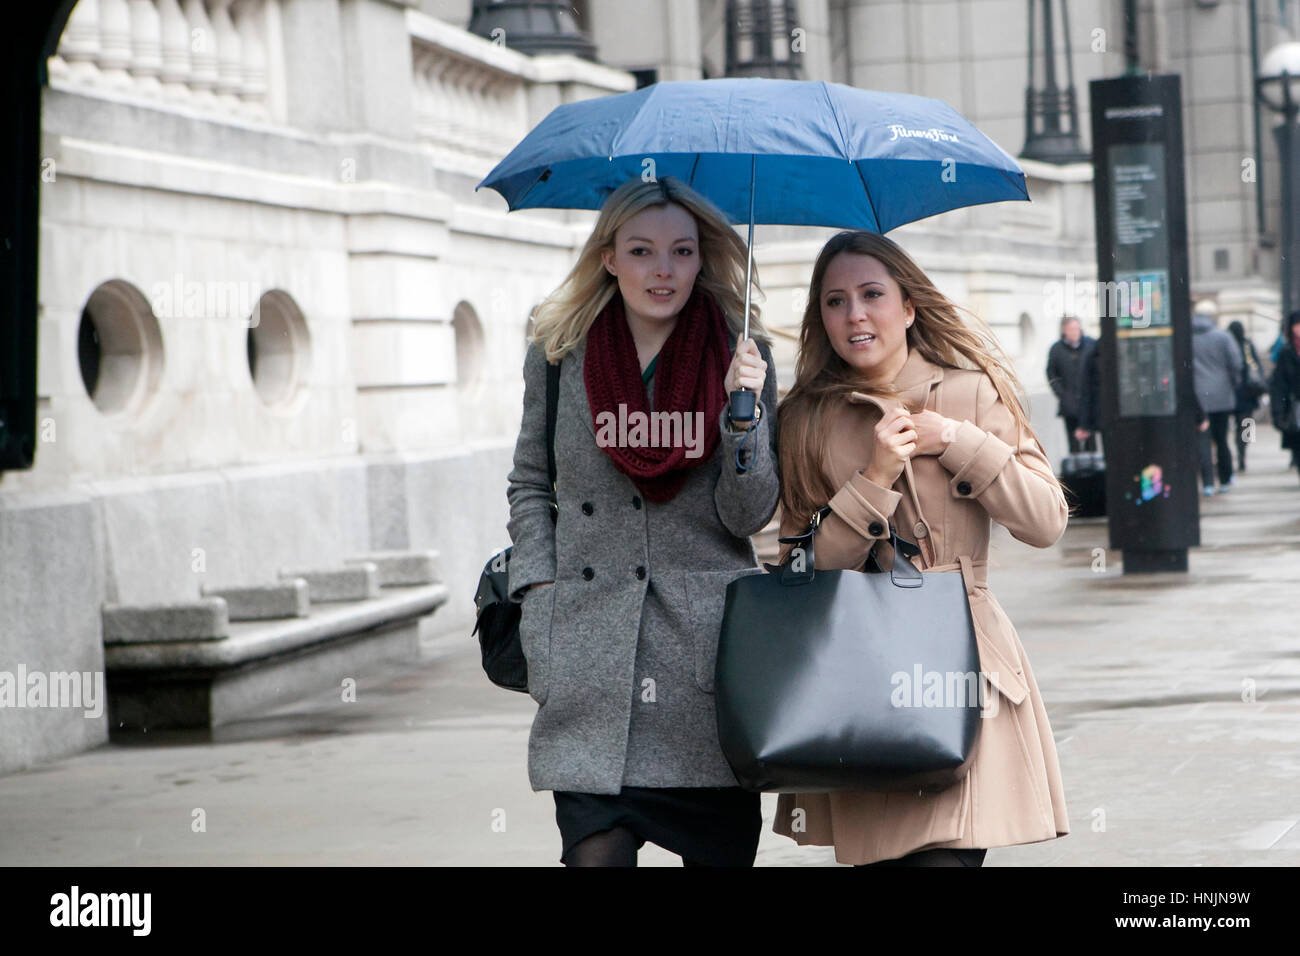 LONDON, UK - APRIL 22, 2016: Two girls under an umbrella on a rainy day cross the road Stock Photo